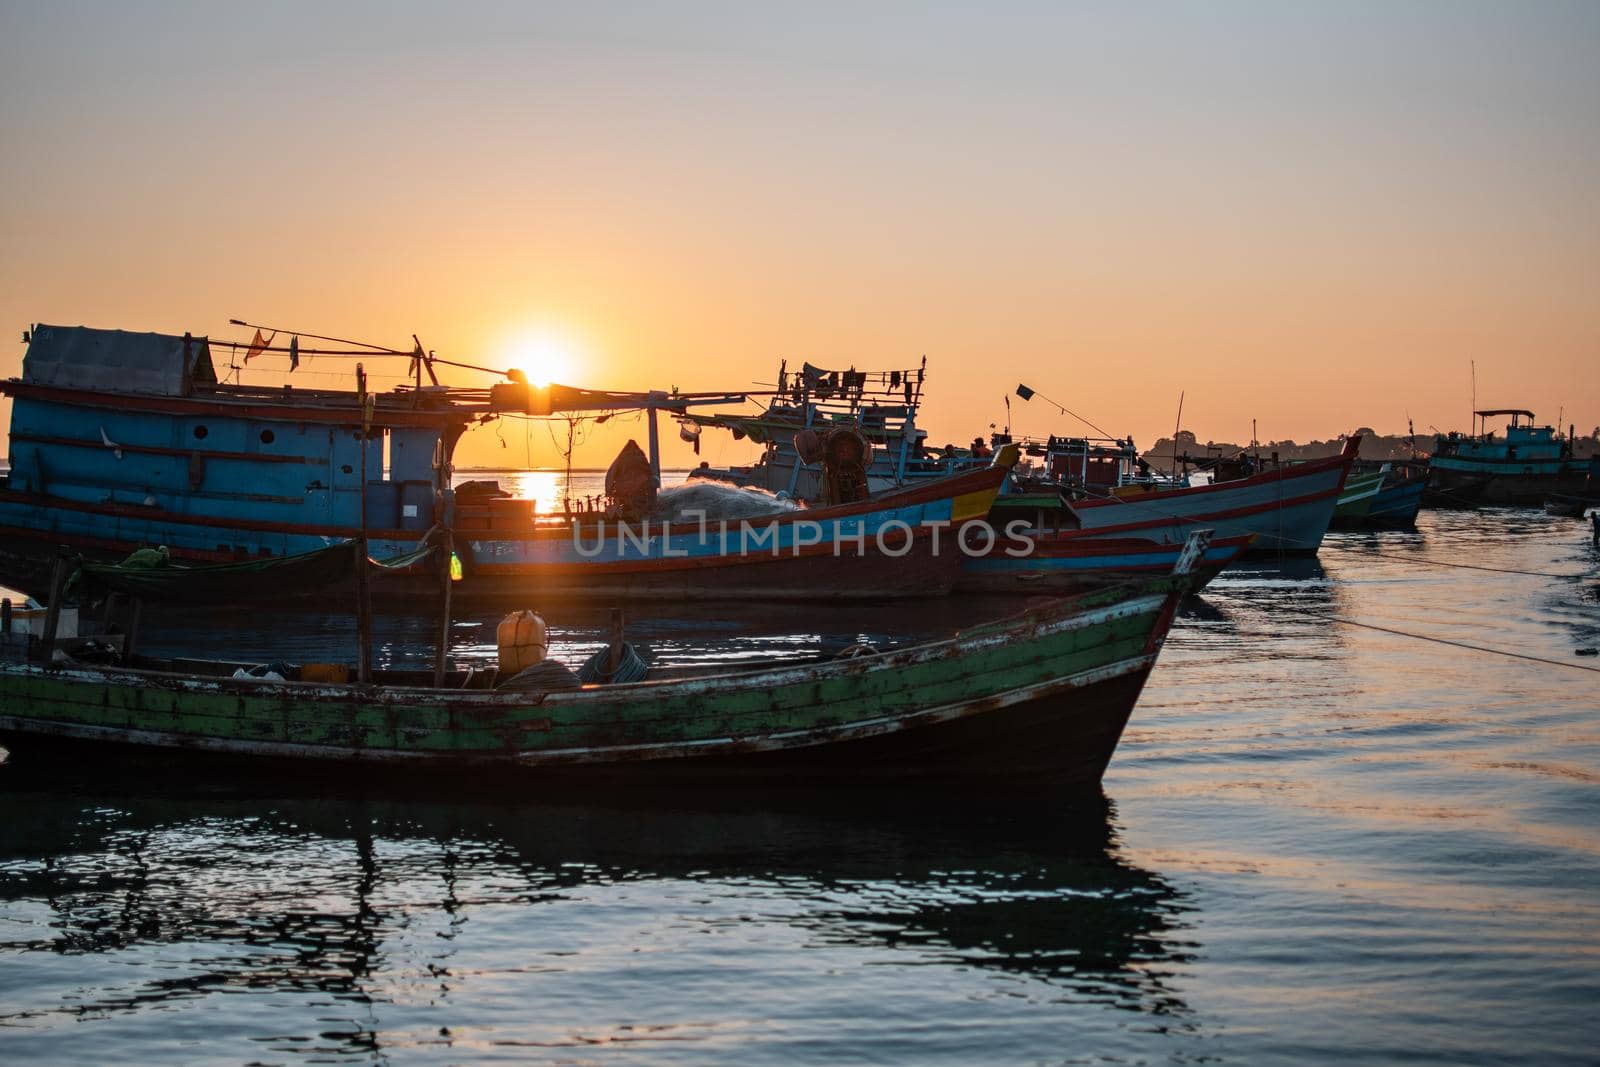 Sunset over colorful traditional wooden fishing boats, Cgaun Thar, Irrawaddy, Myanmar by arvidnorberg